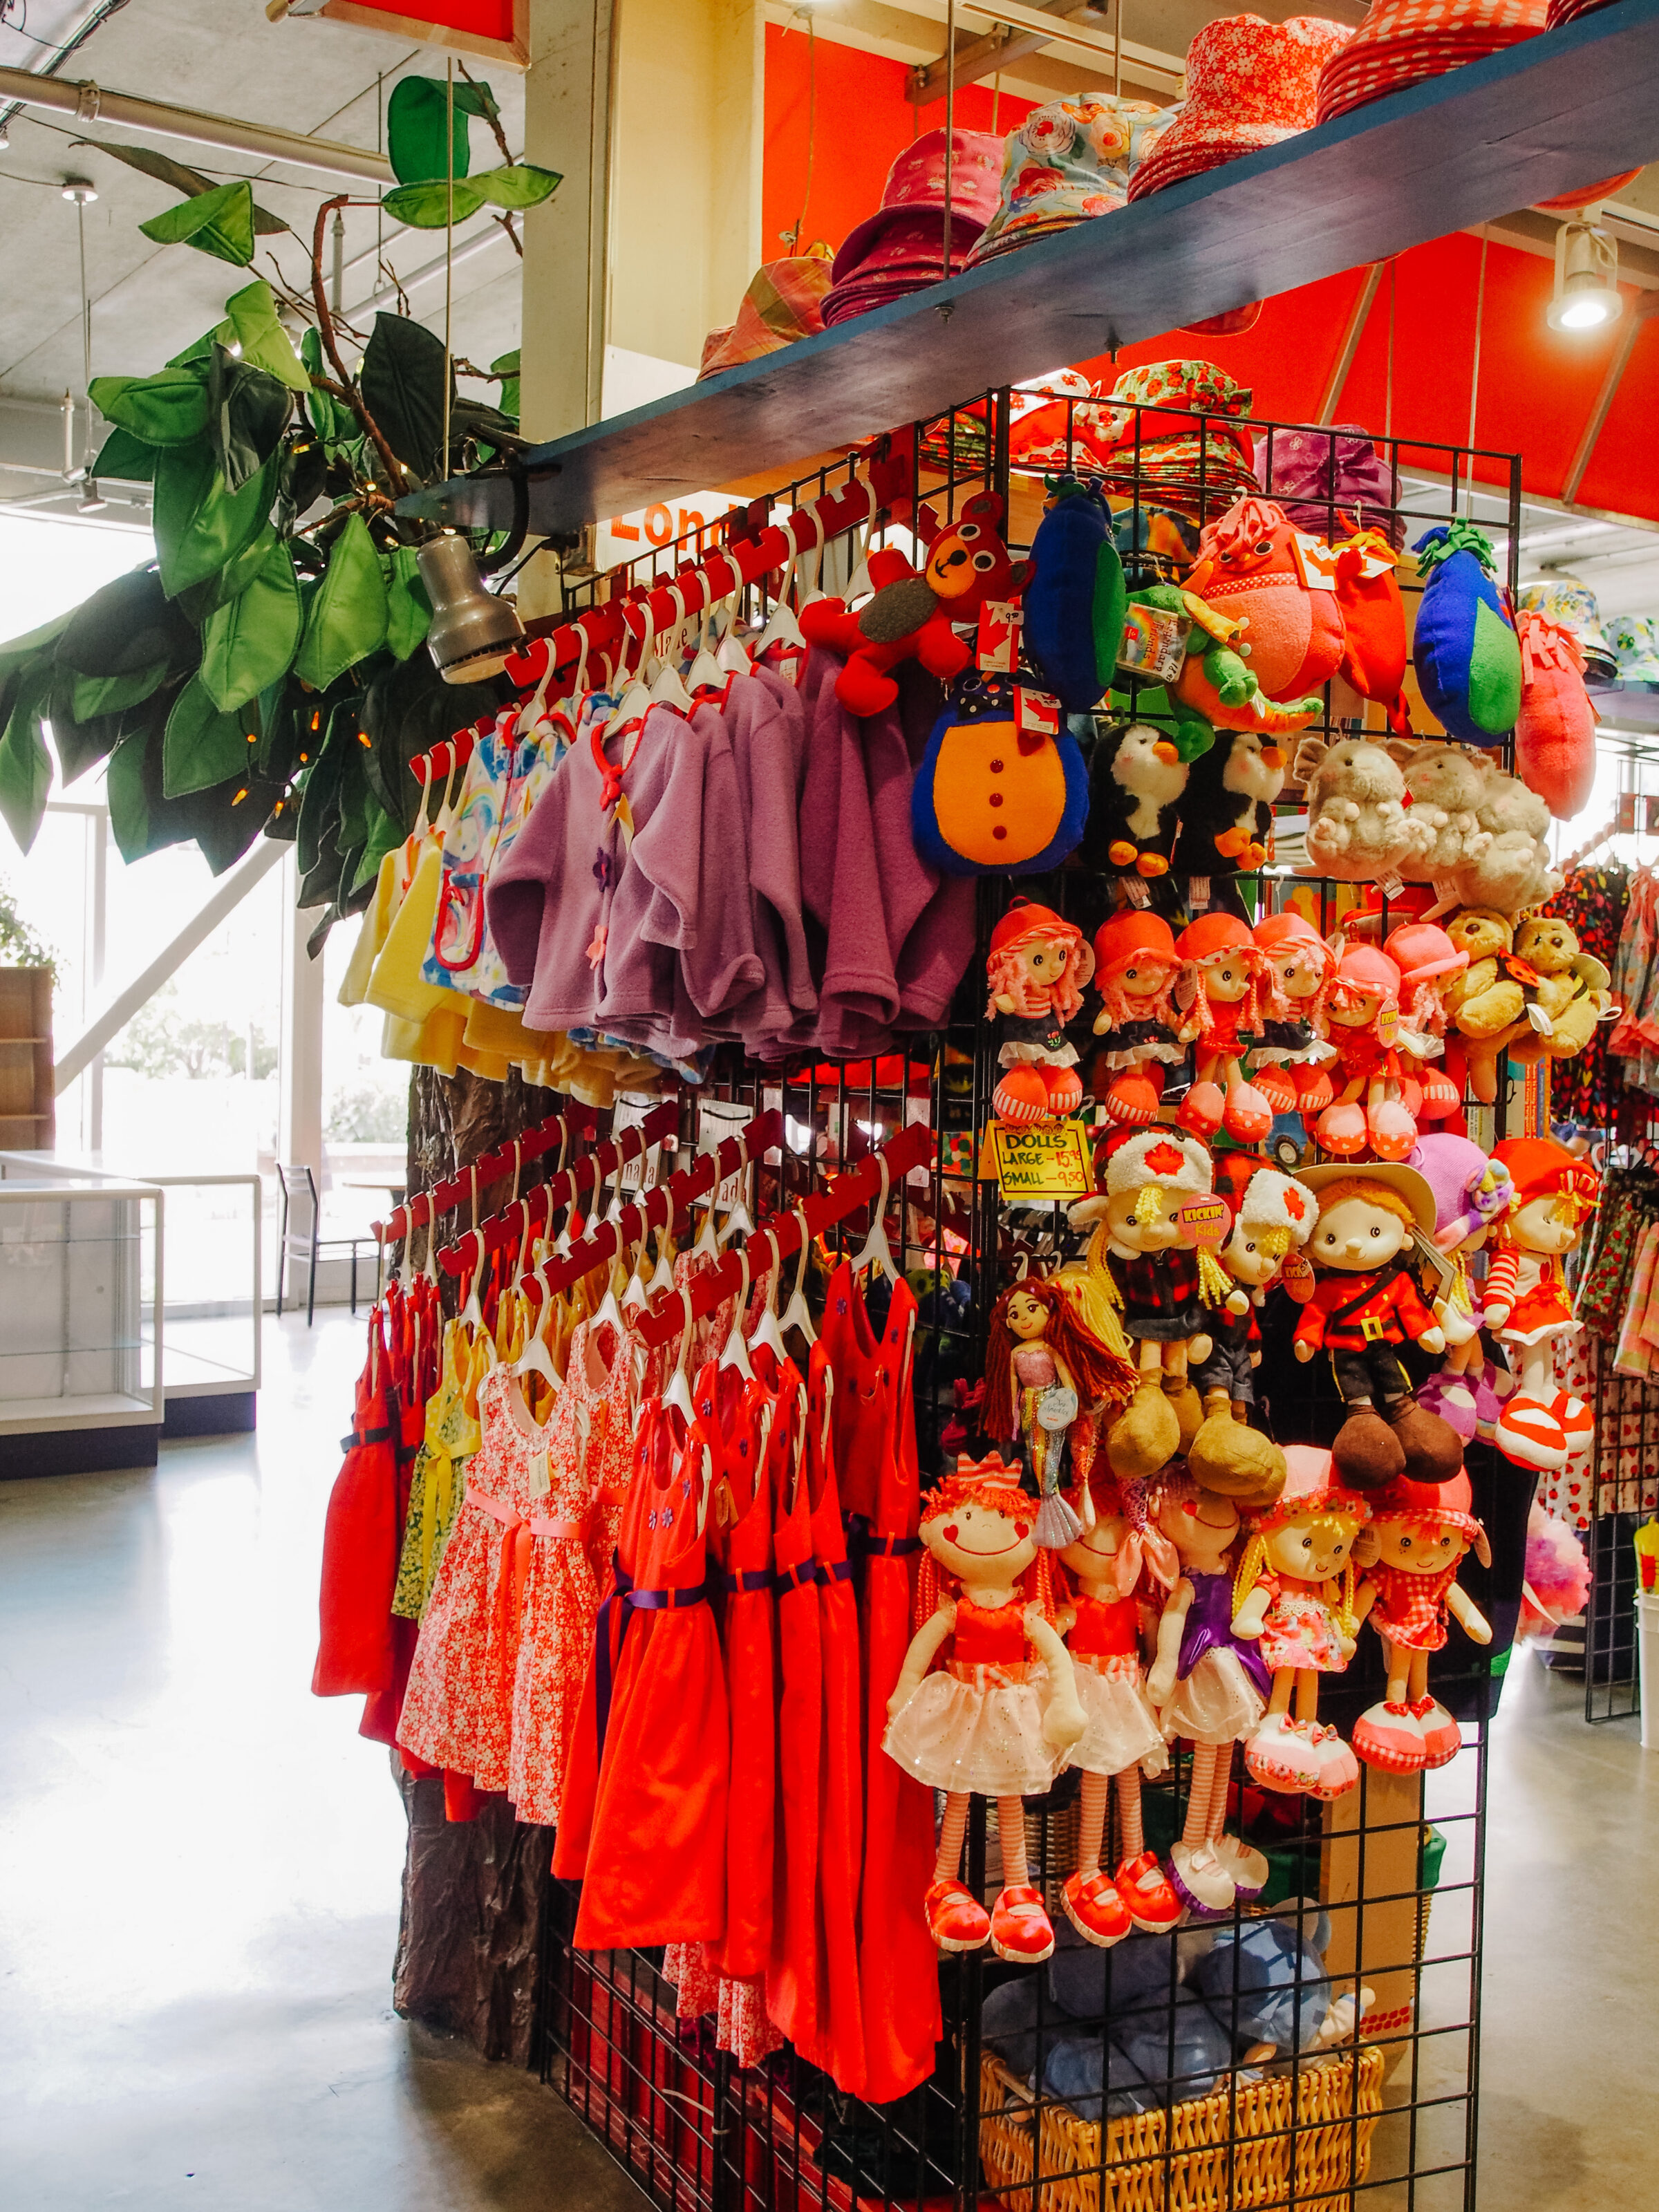 Shopping for tweens and teens' clothes in Singapore